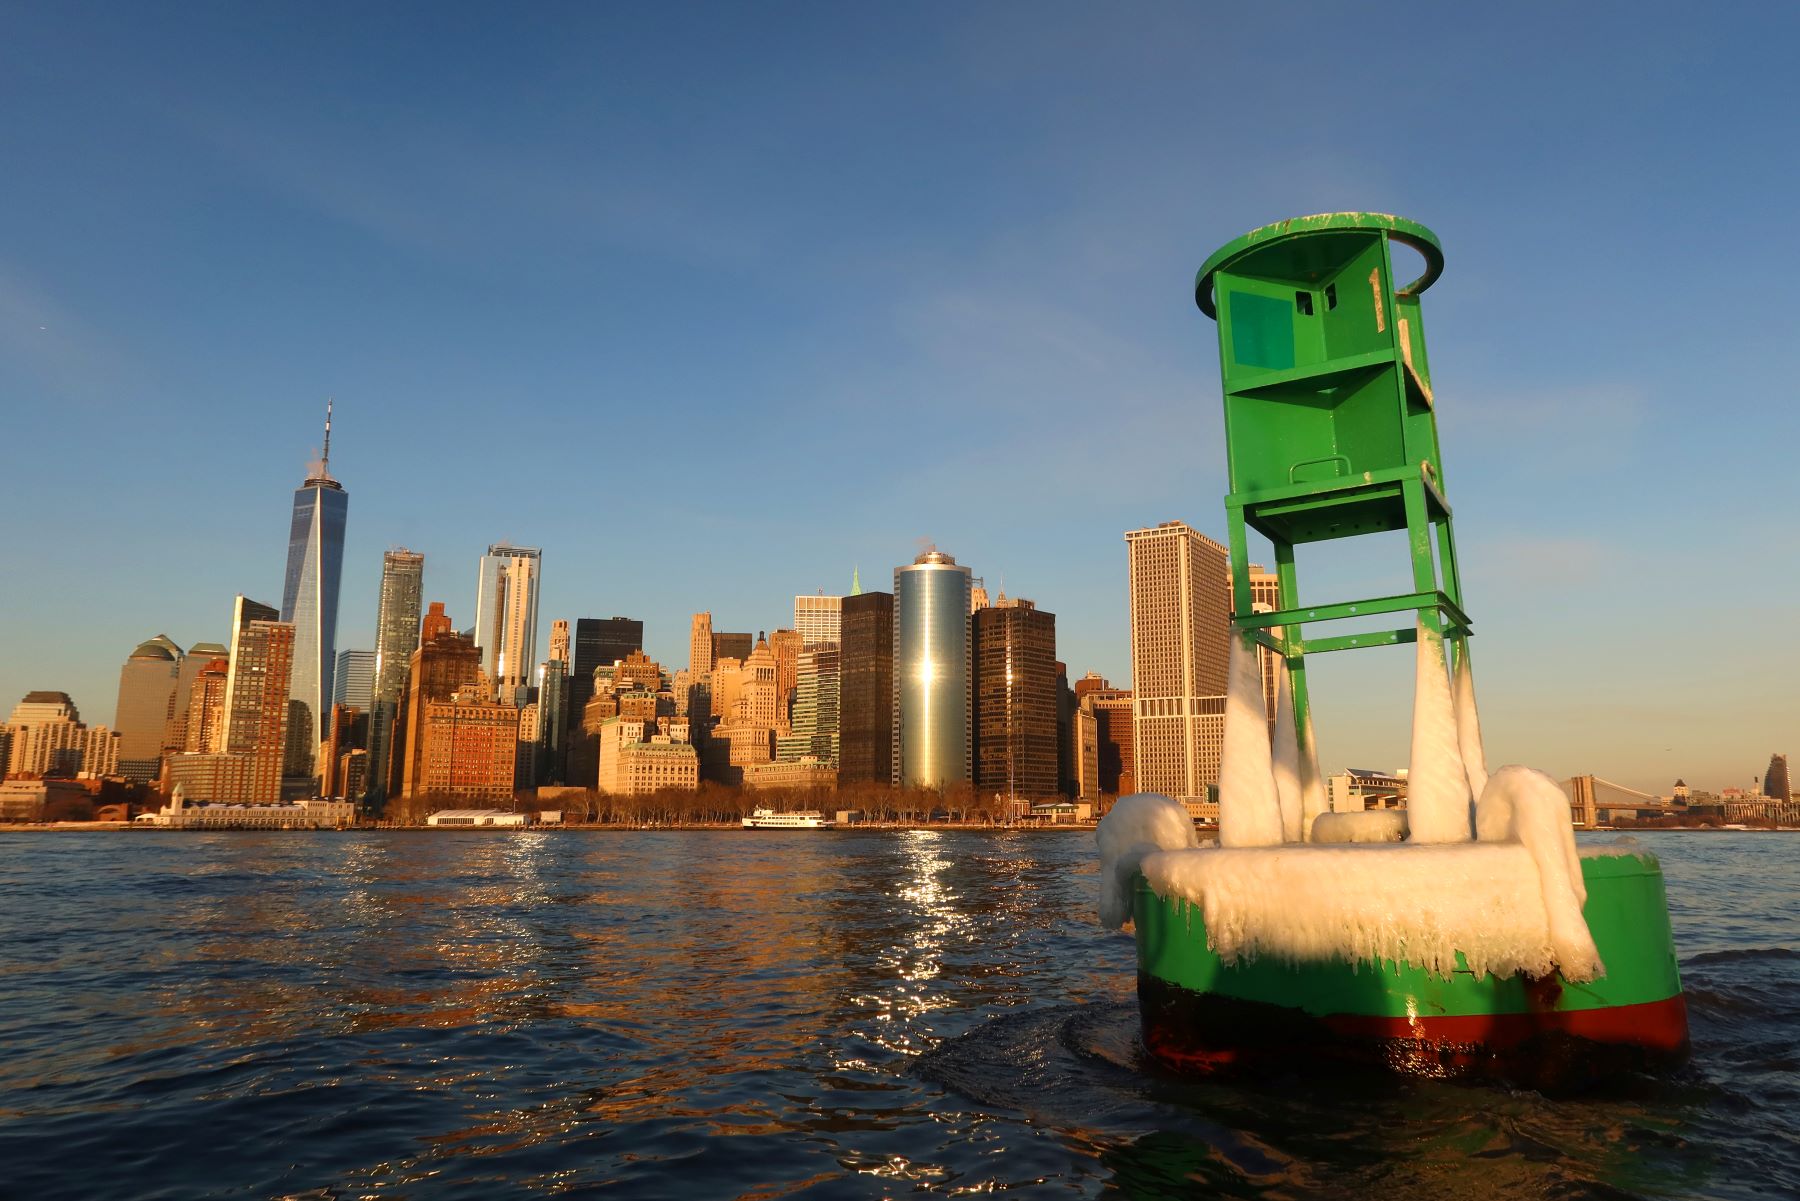 A green buoy covered in ice in the New York Harbor area of lower Manhattan and the One World Trade Center